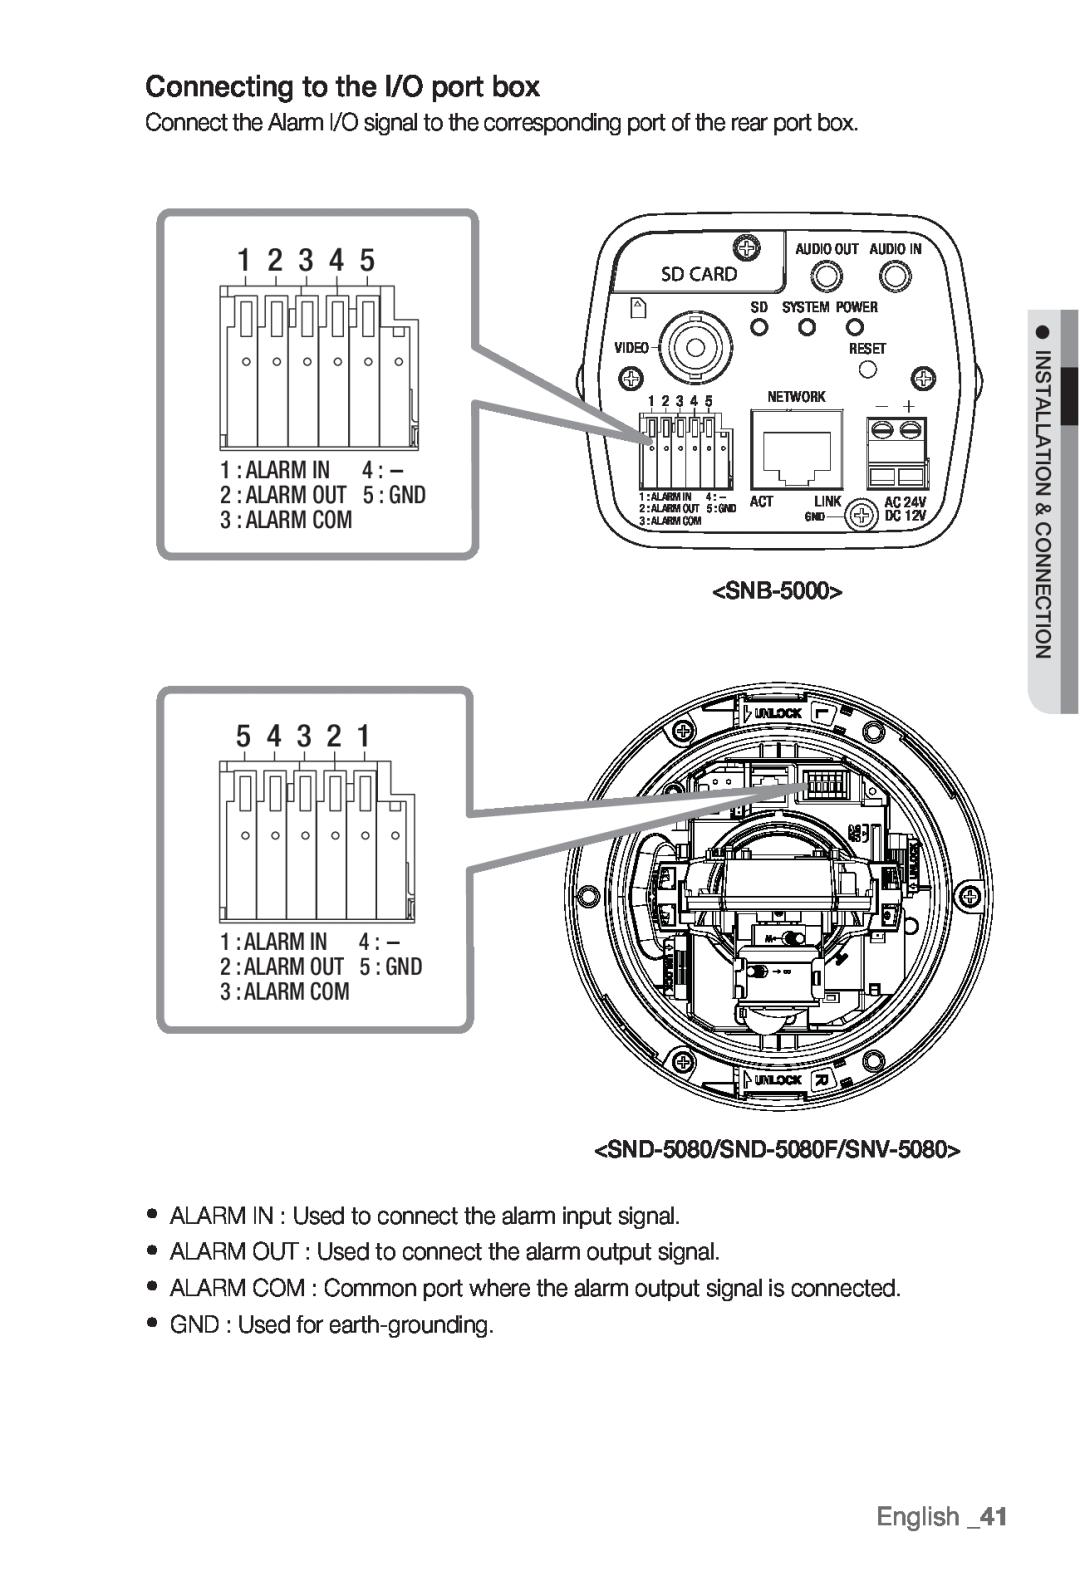 Samsung SNV-5080, SNB-5000, SND-5080F, SNB5000 user manual 1 2 3 4, 5 4 3 2, Connecting to the I/O port box, Gnd, English 